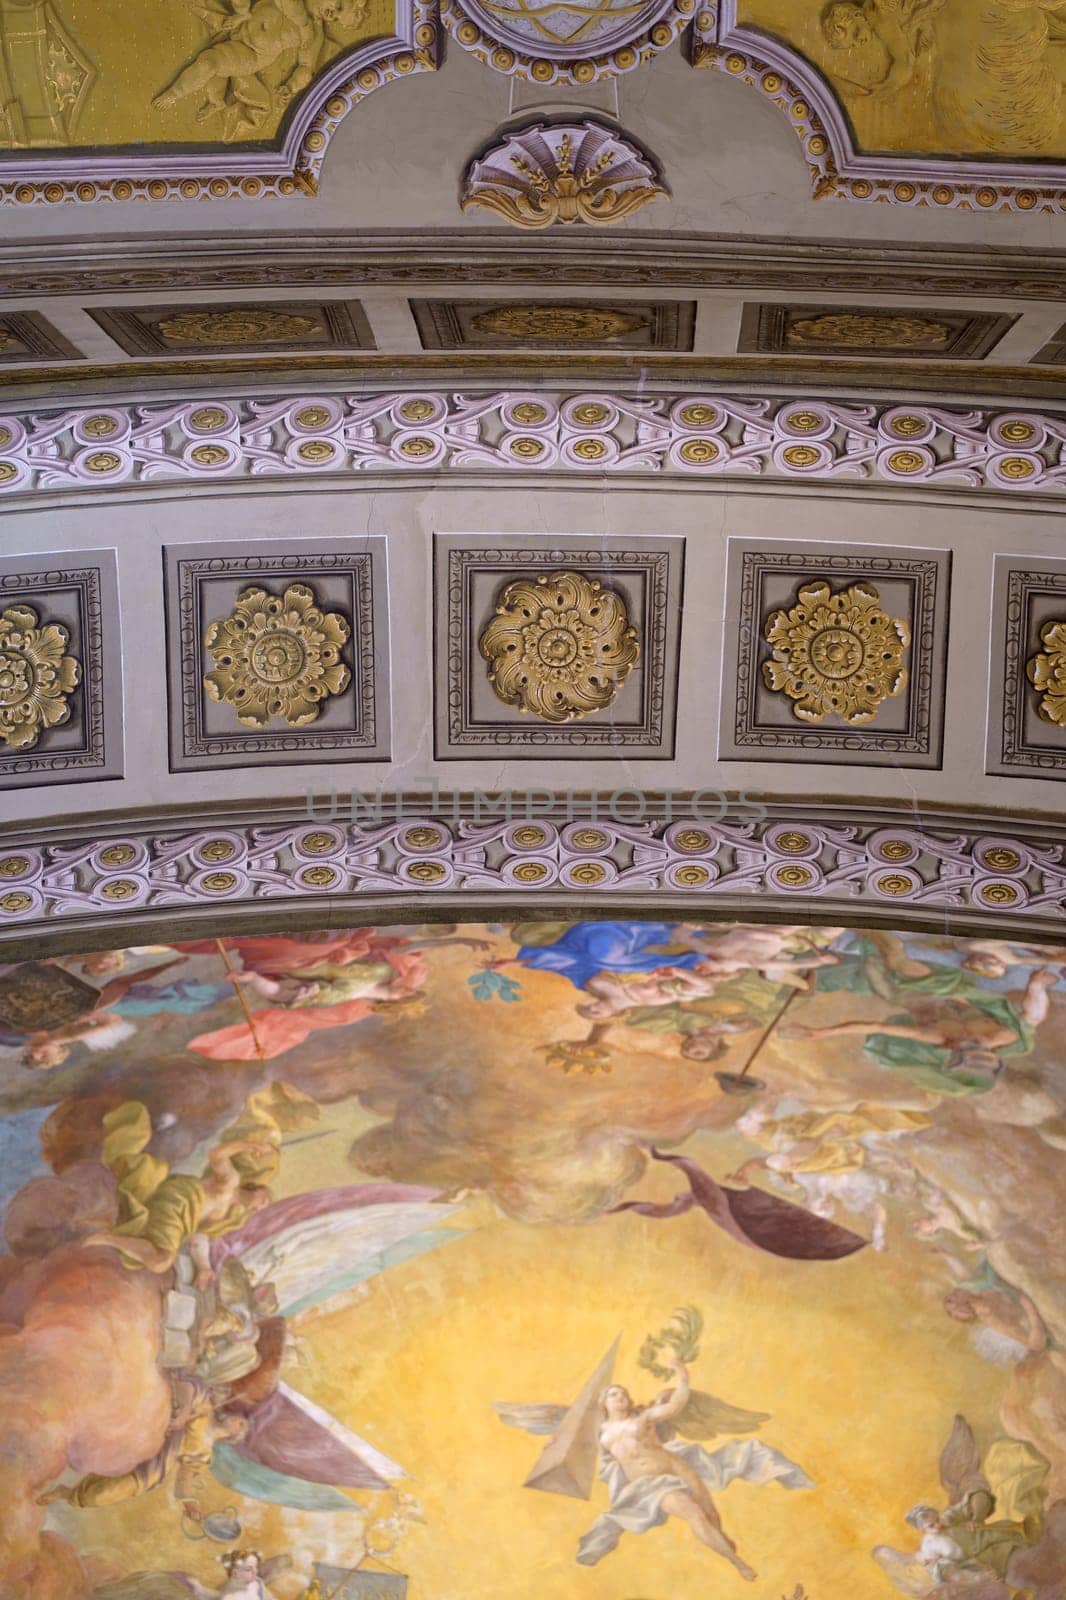 Ceiling frescoes painting, allegory of peace heaven by Daniel Gran at Austrian National Library in Vienna.